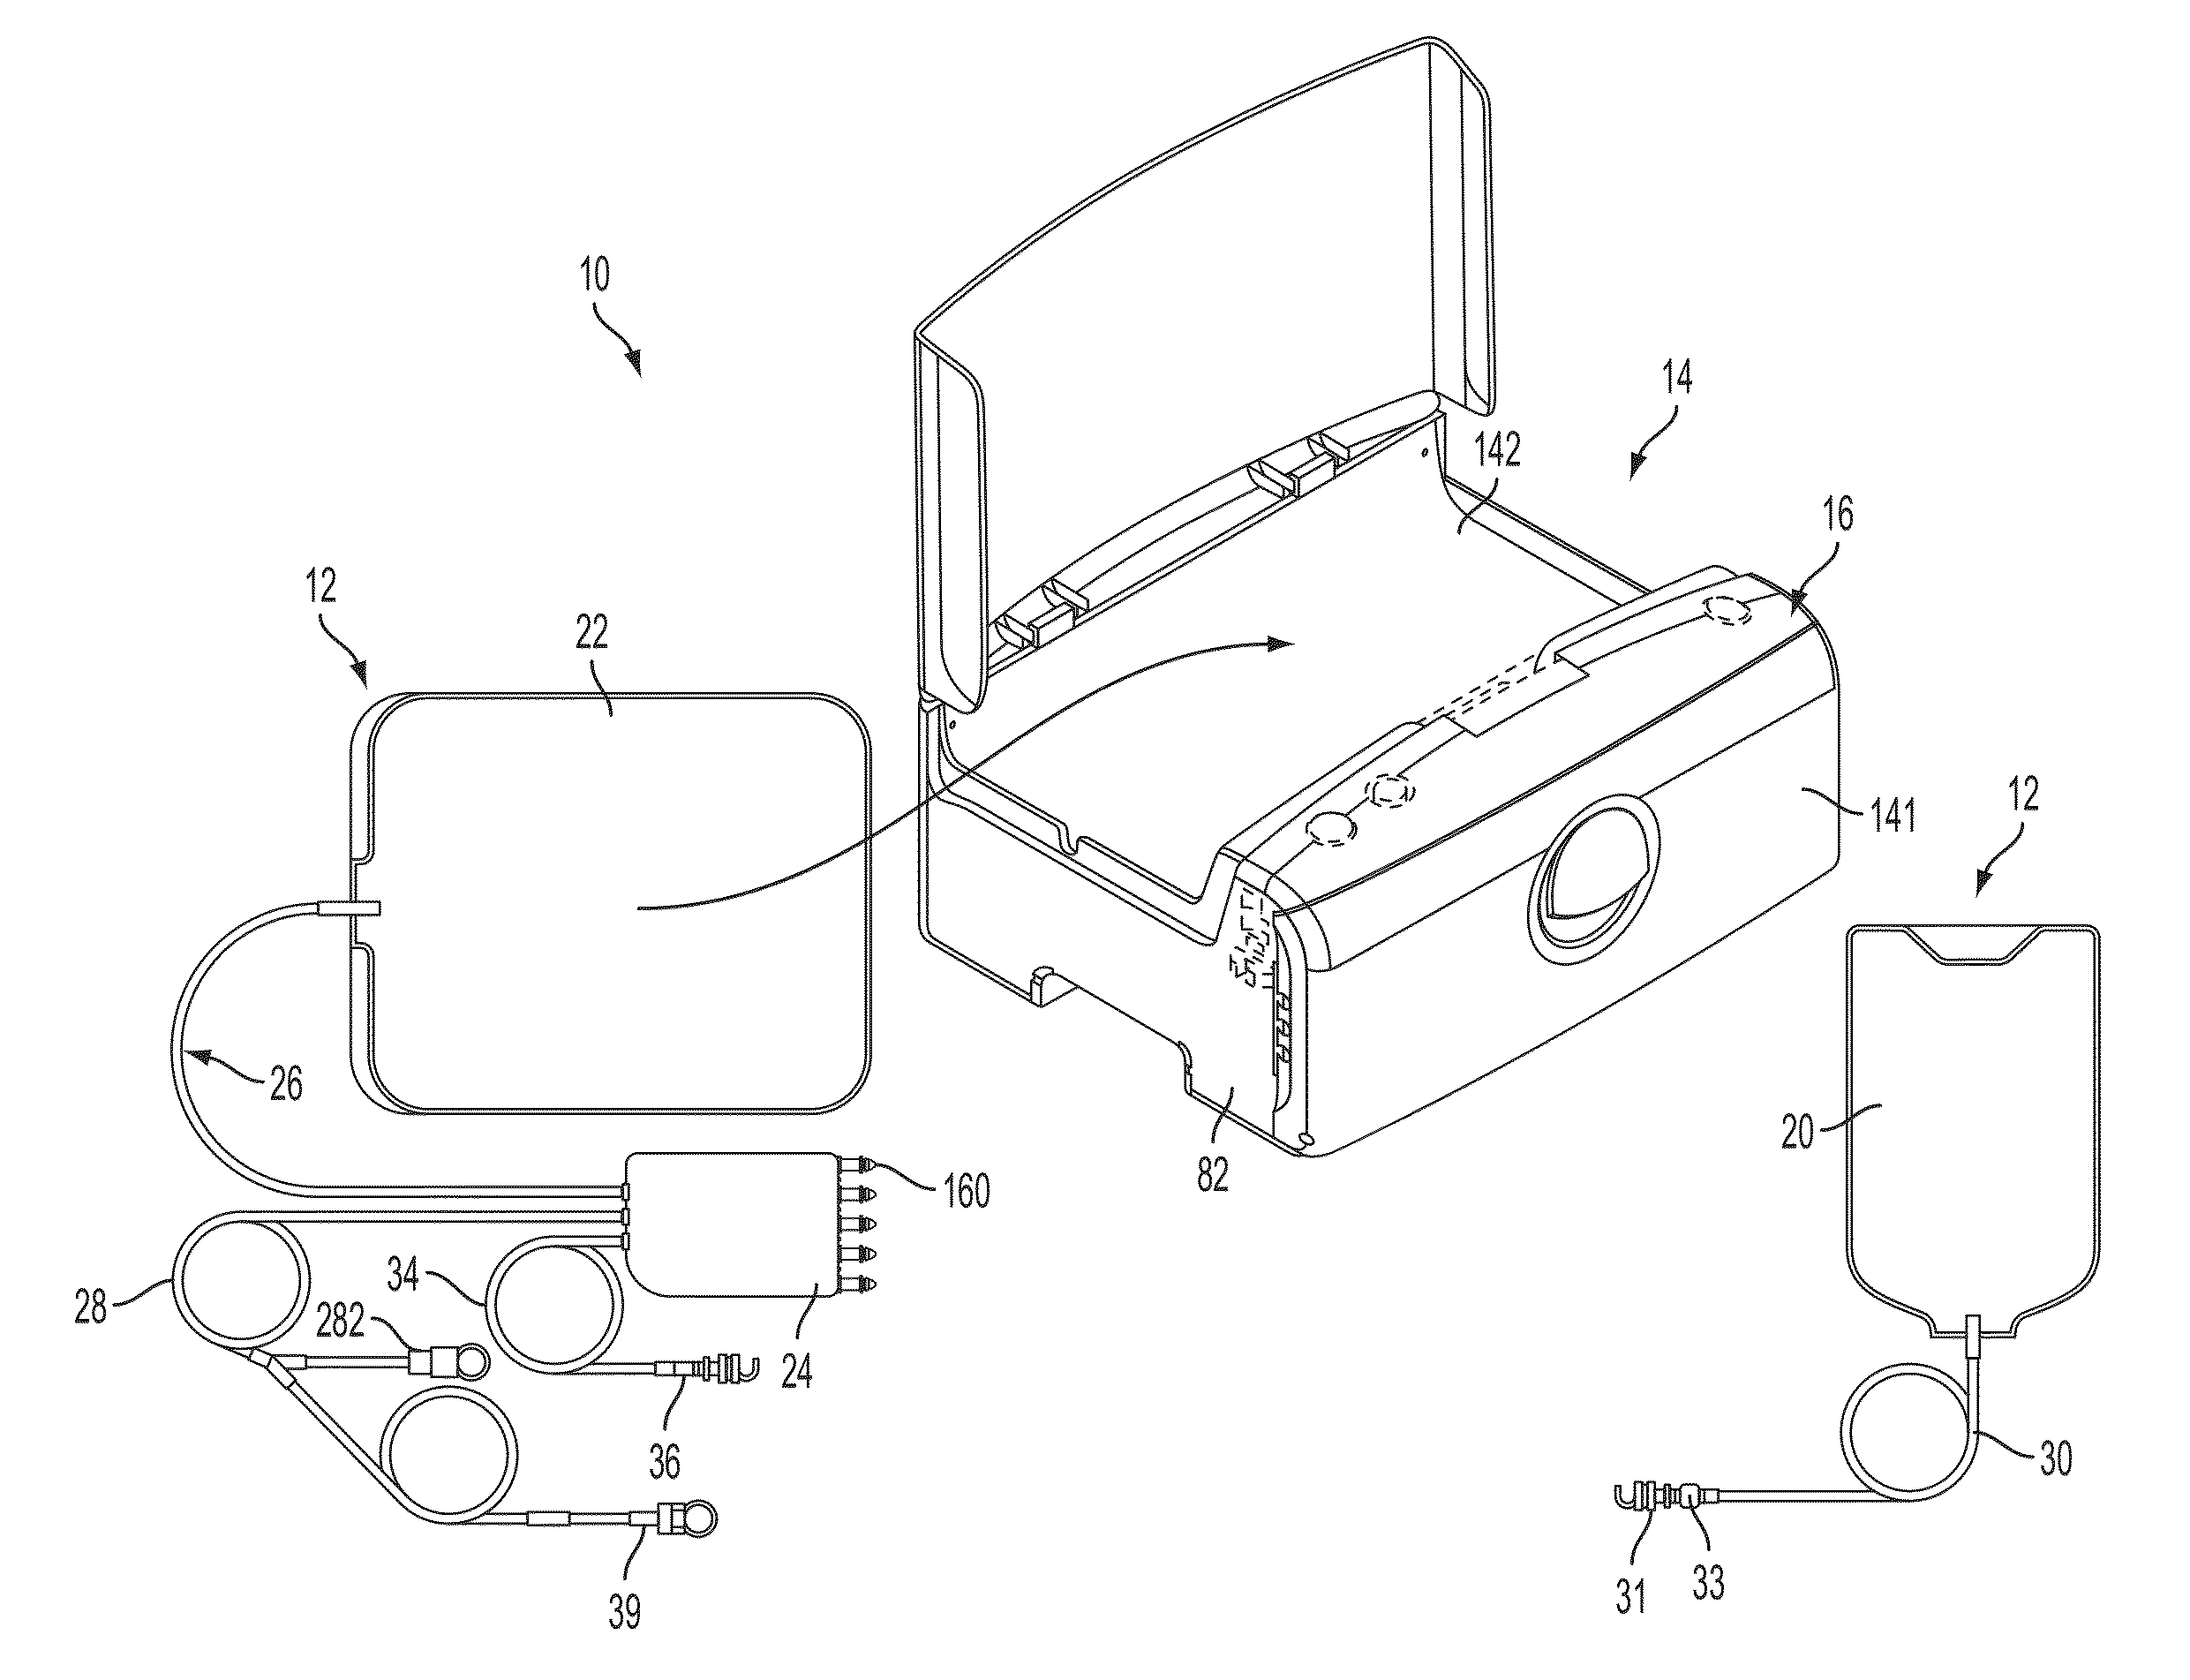 Medical Treatment System and Methods Using a Plurality of Fluid Lines